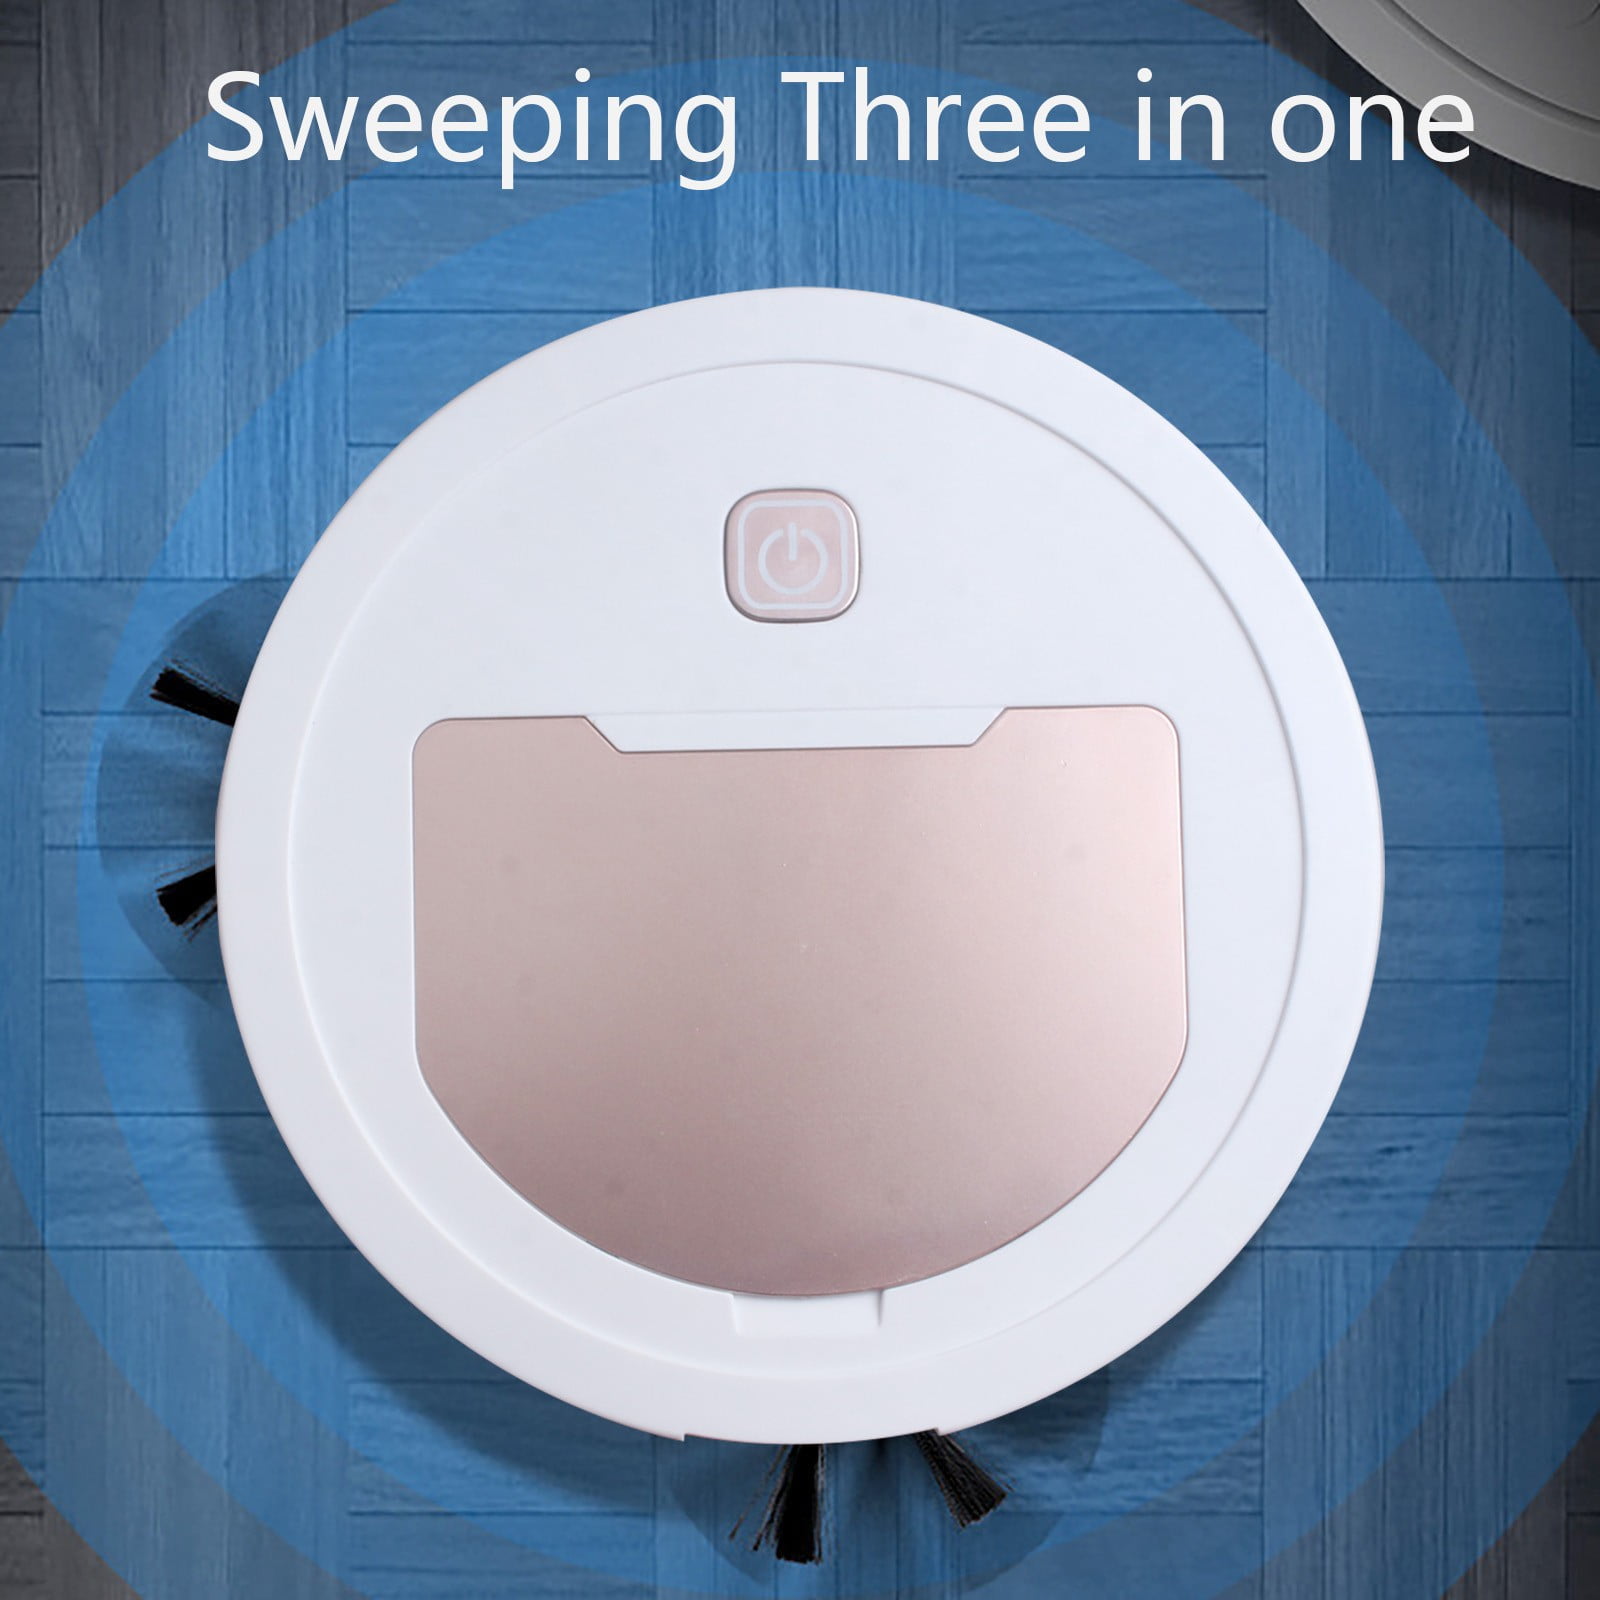 Bunke af Motley vand blomsten CFXNMZGR Sweeping Robot Robot Dry Intelligent Cleaner In Wet Vacuum  Rechargeable And Three Sweeping One Small Appliances - Walmart.com